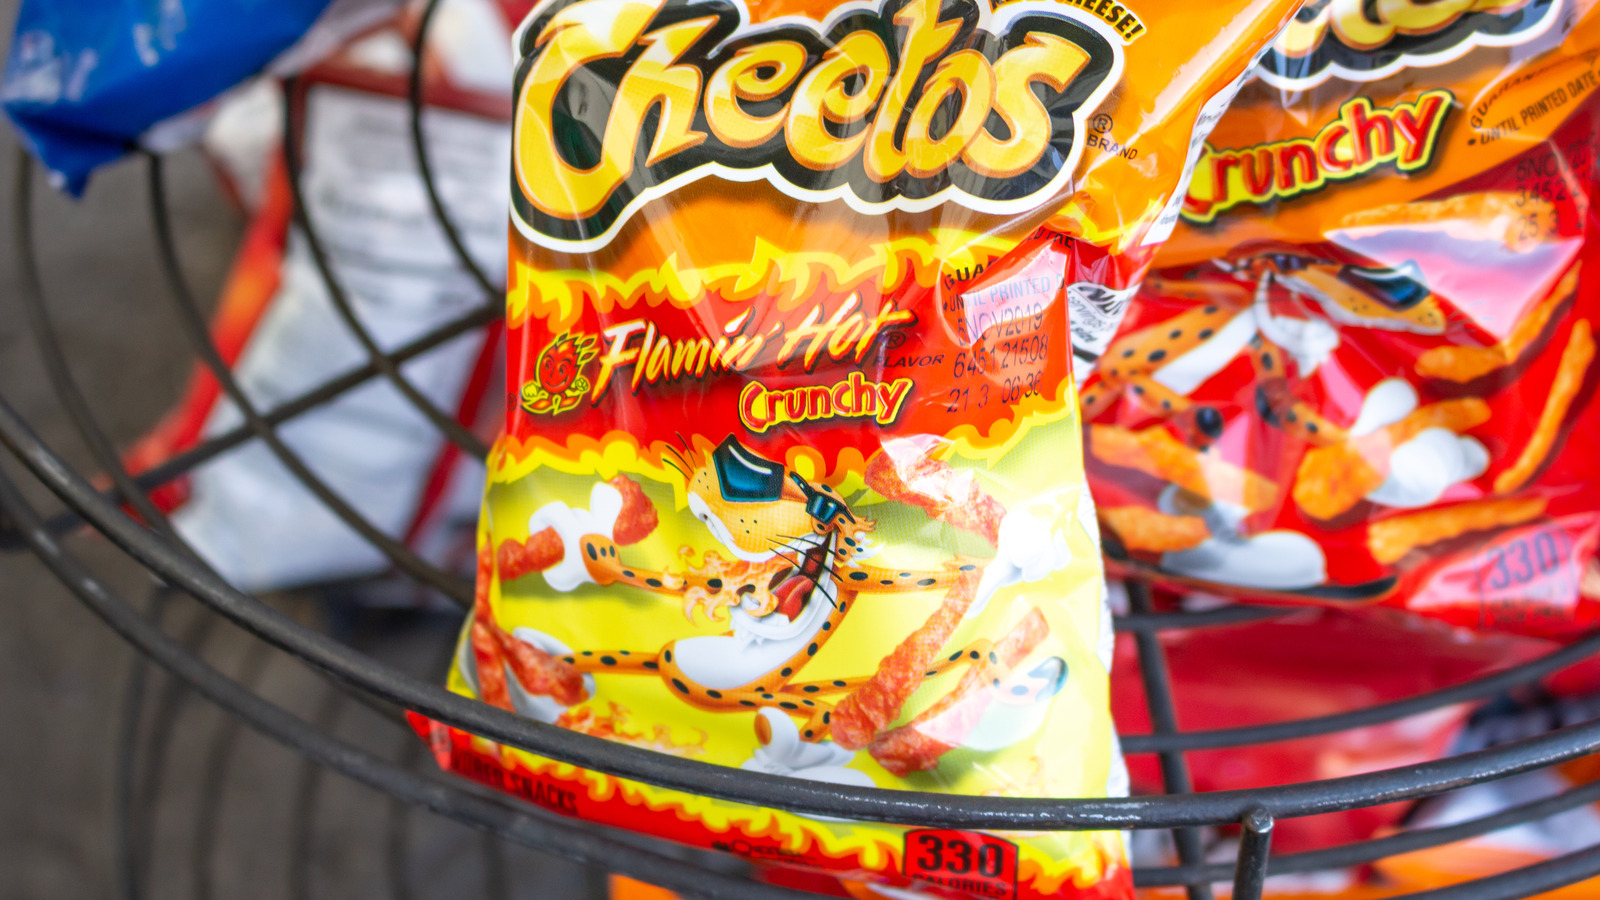 Brazilian Cheetos, I need Cheetos from other countries - pl…